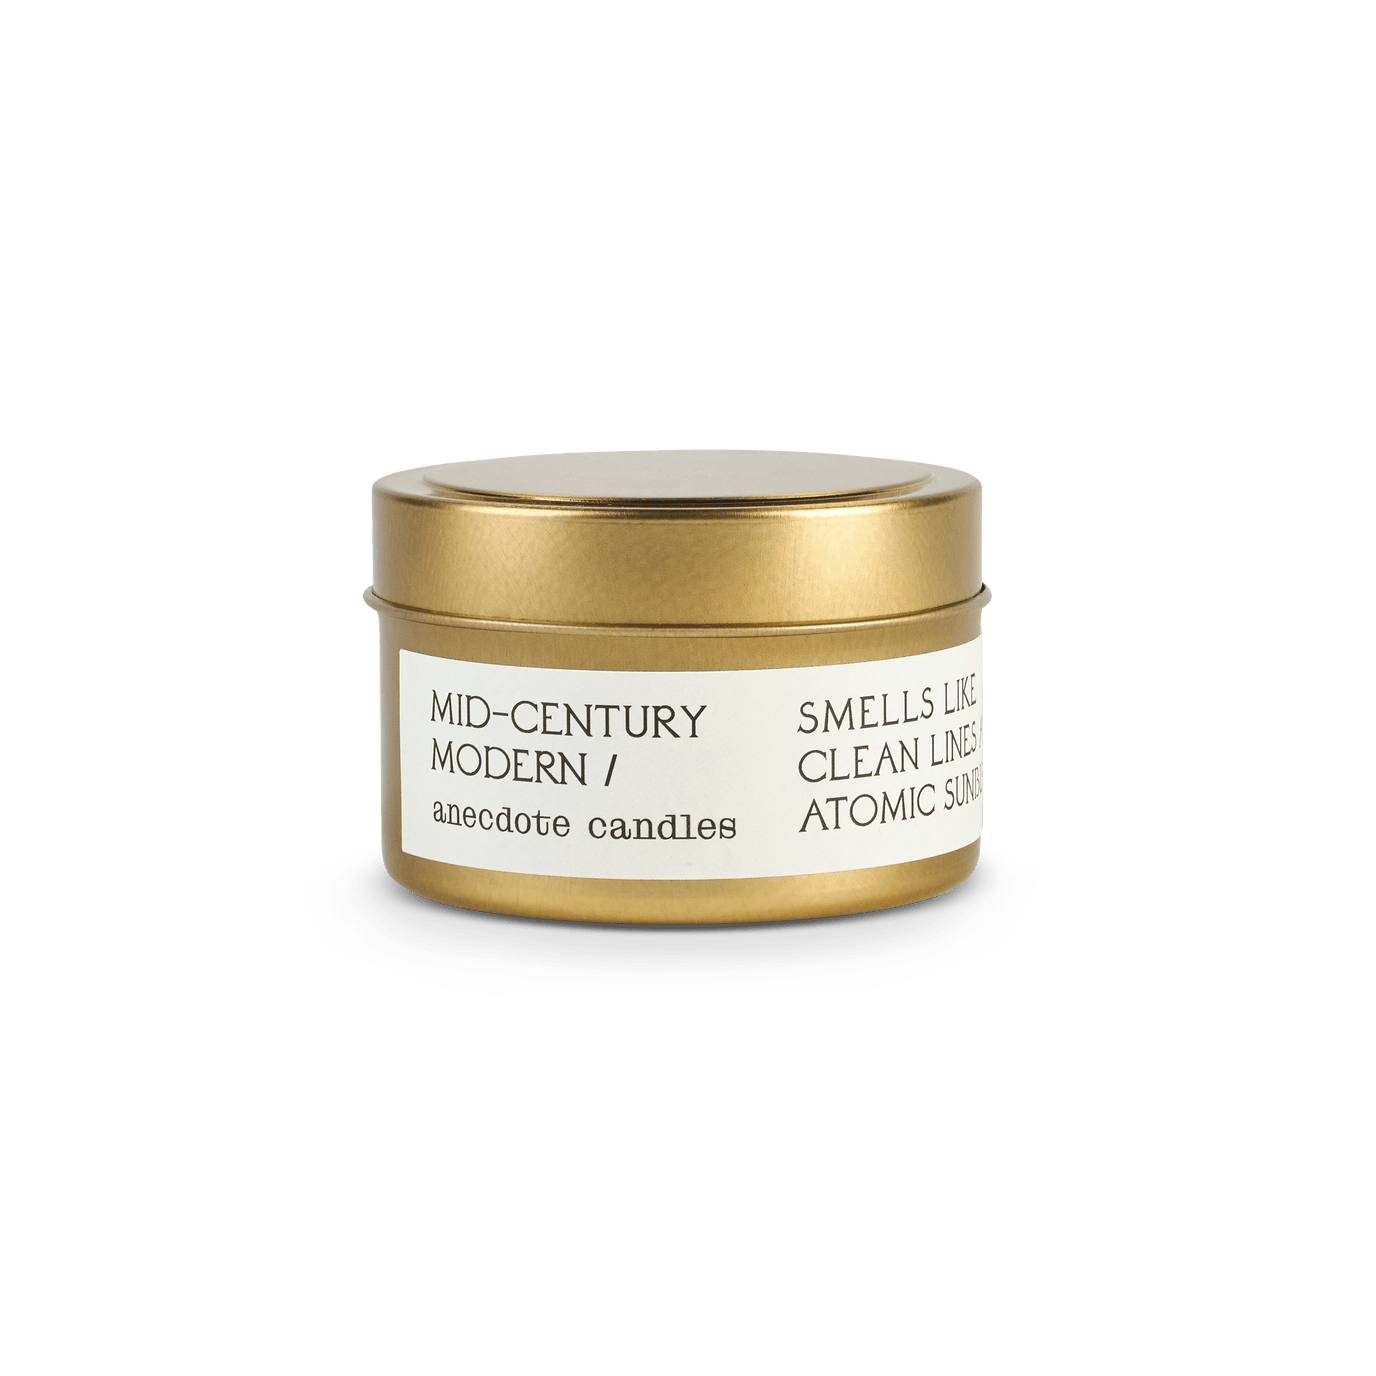 Small candle with label reading Mid-century modern.